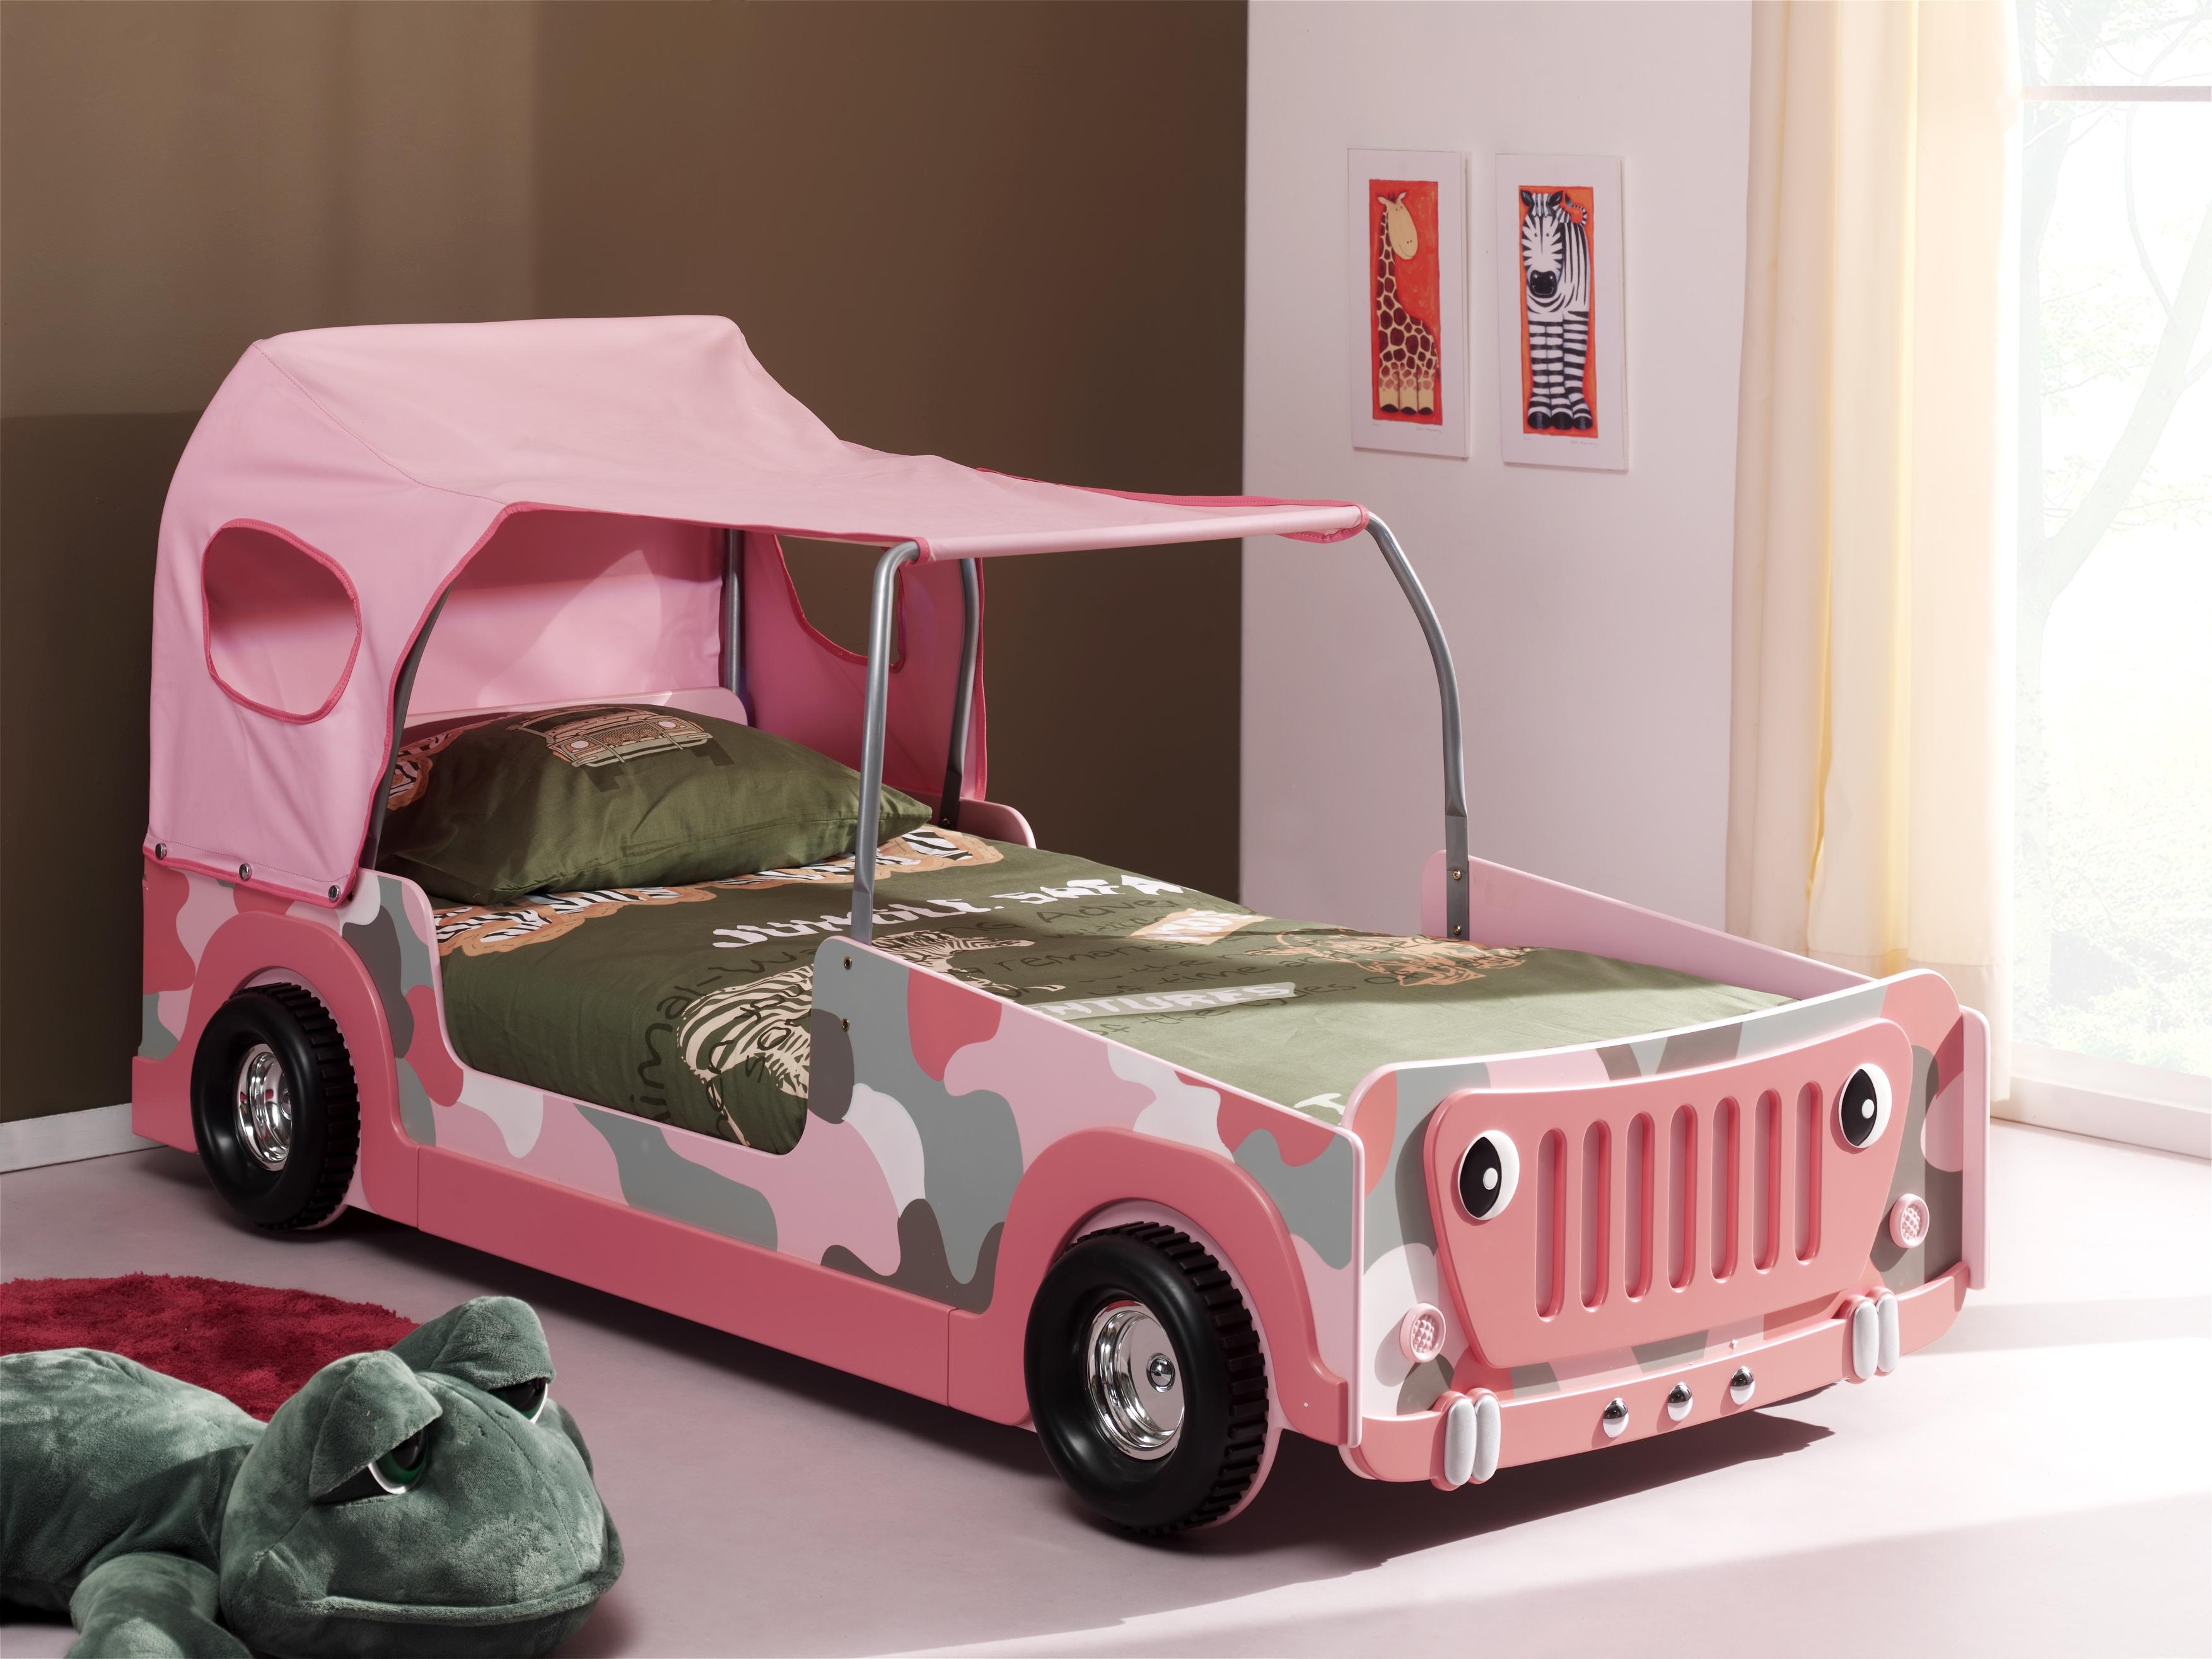 Amazing beds for kids